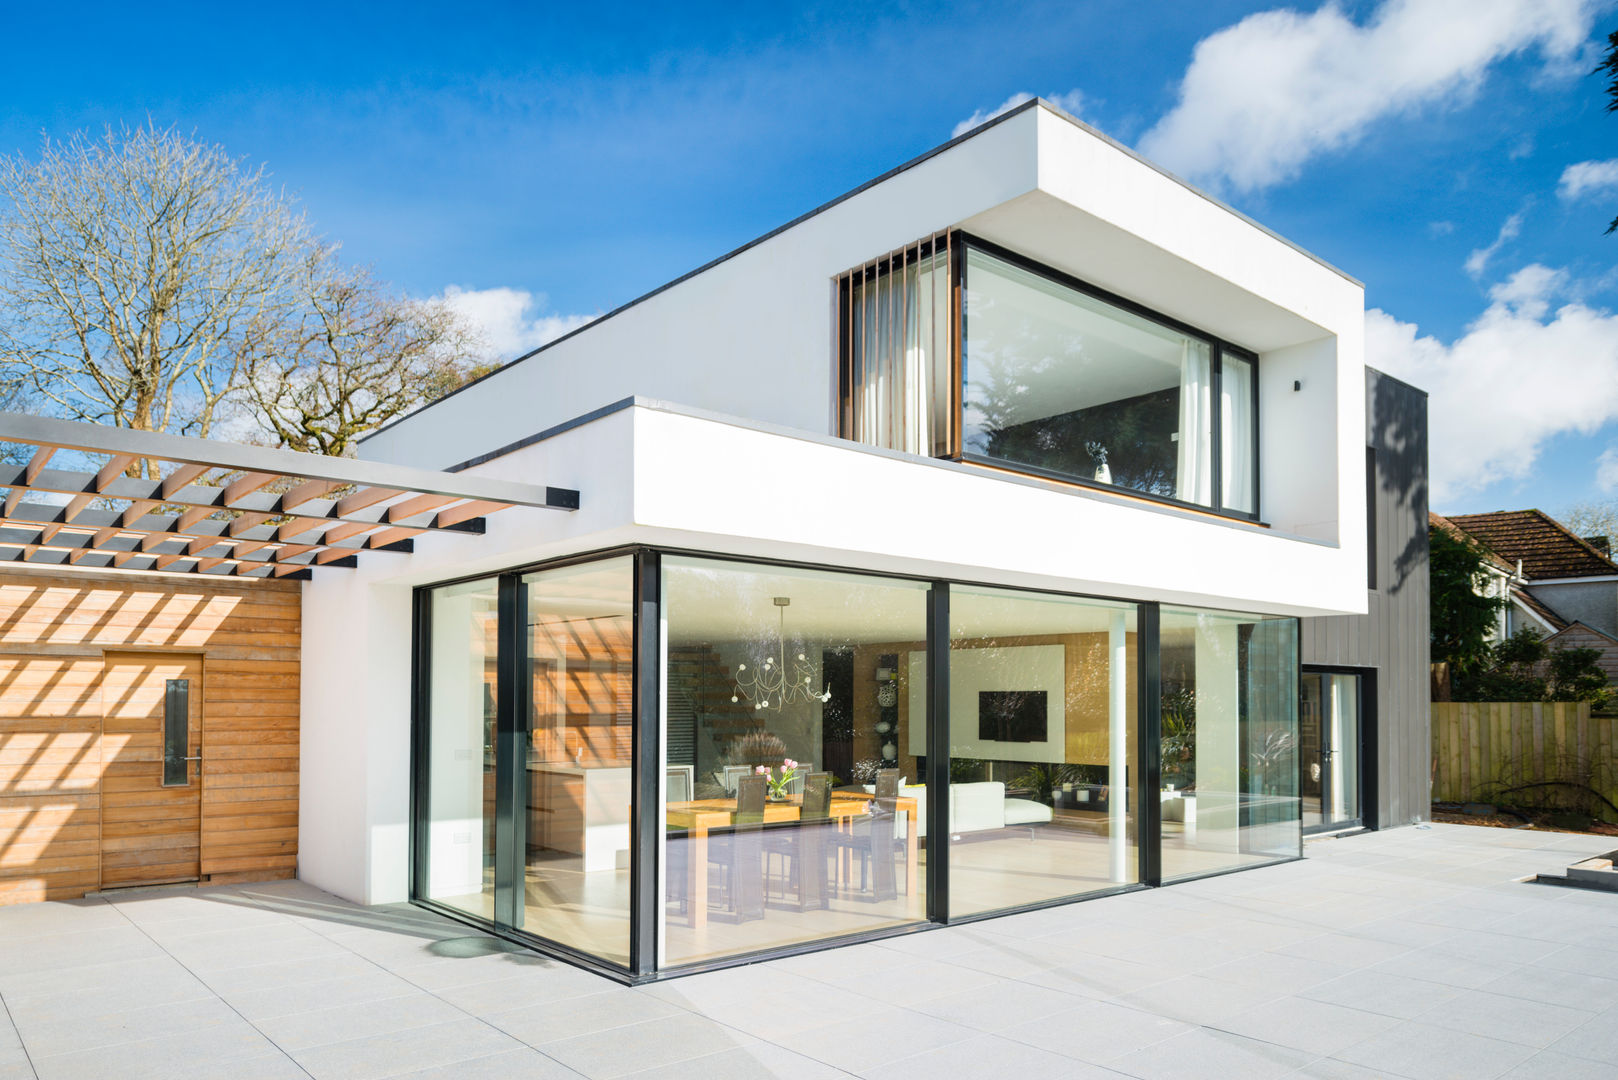 White Oaks Exterior Barc Architects منازل contemporary,modern,bold,glass,render,flat roof